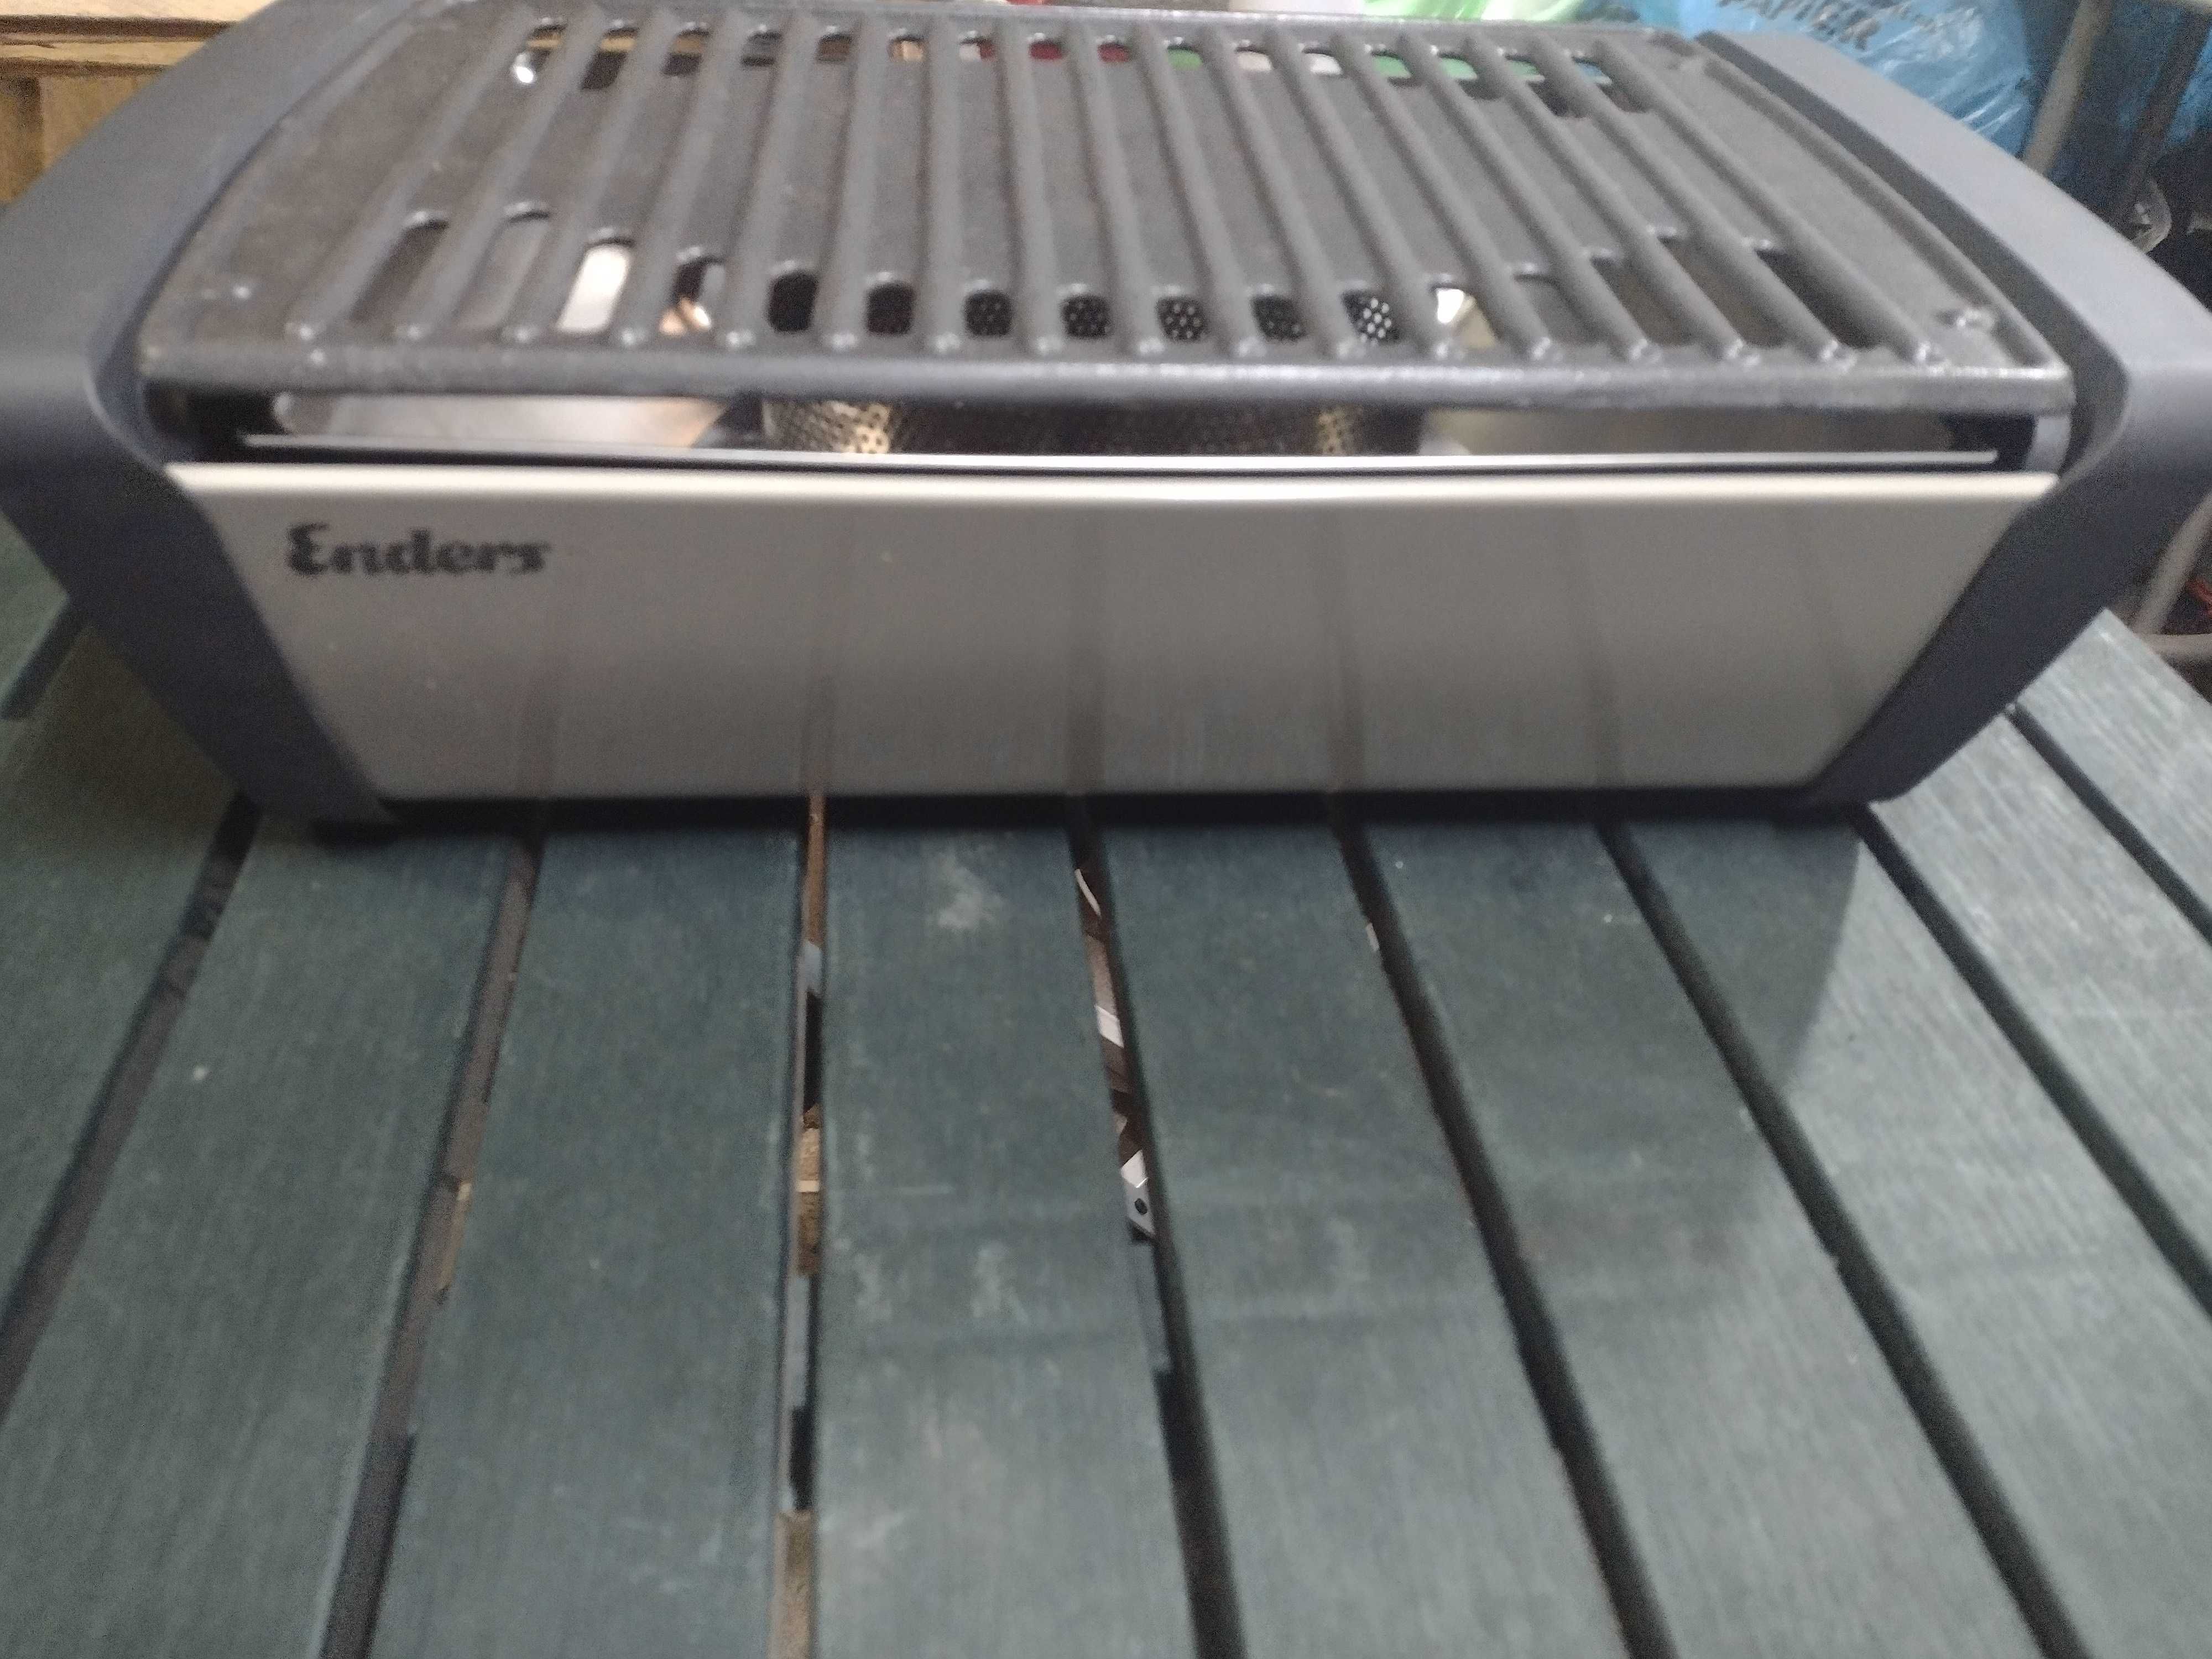 Enders Grill Aurora Pro Led